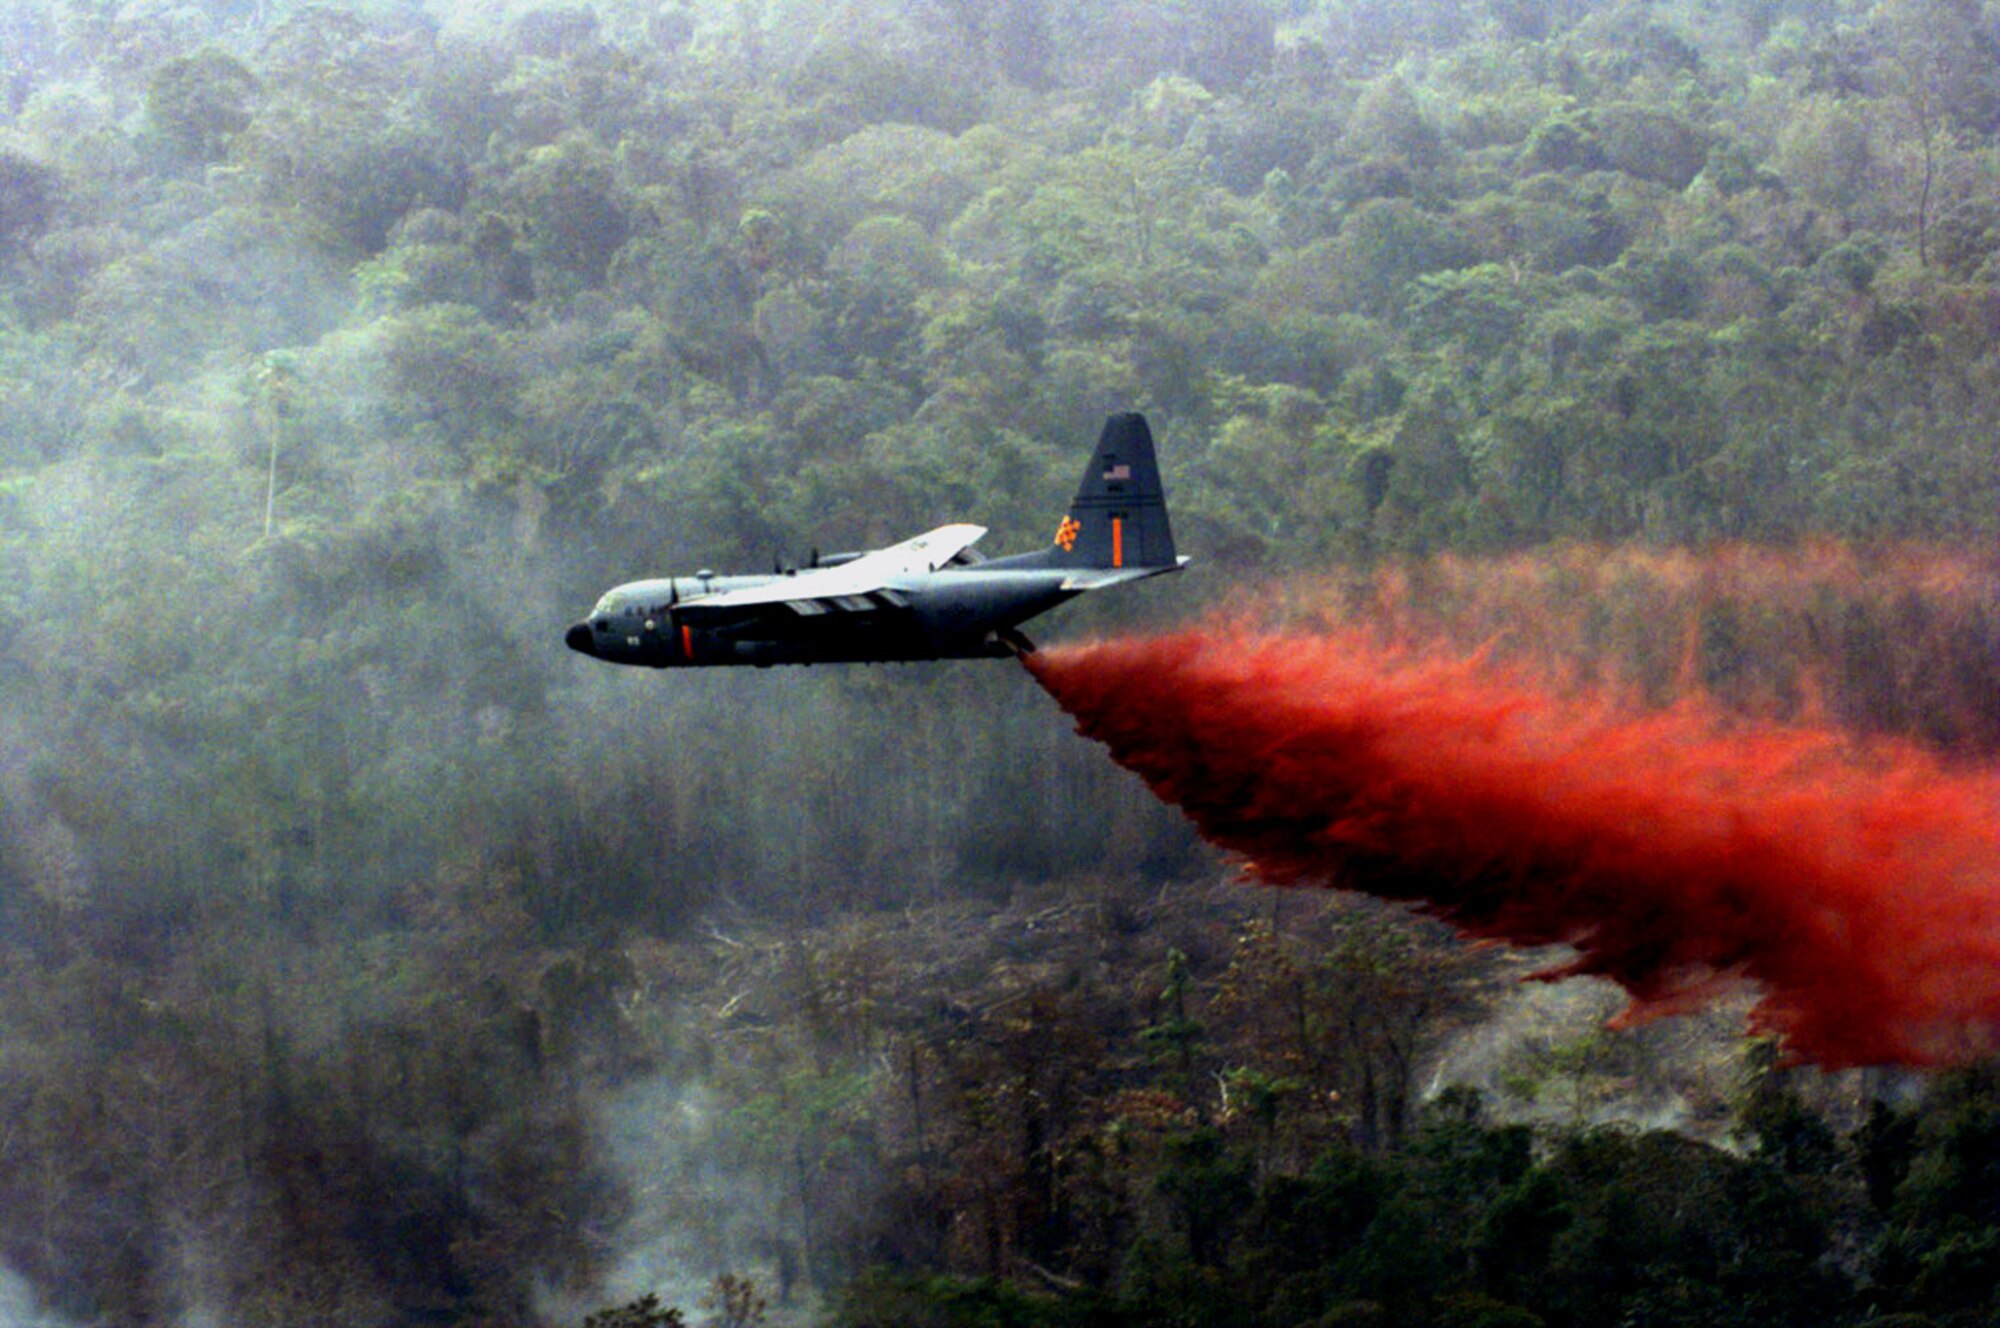 Air Force Reserve aircrews and maintainers stand ready to fight wildfires using C-130 Hercules equipped with modular airborne firefighting systems, similar to this one.  The aircraft can drop up to 3000 gallons of retardant covering an area one-quarter of a mile long and 60 feet wide. (File photo)